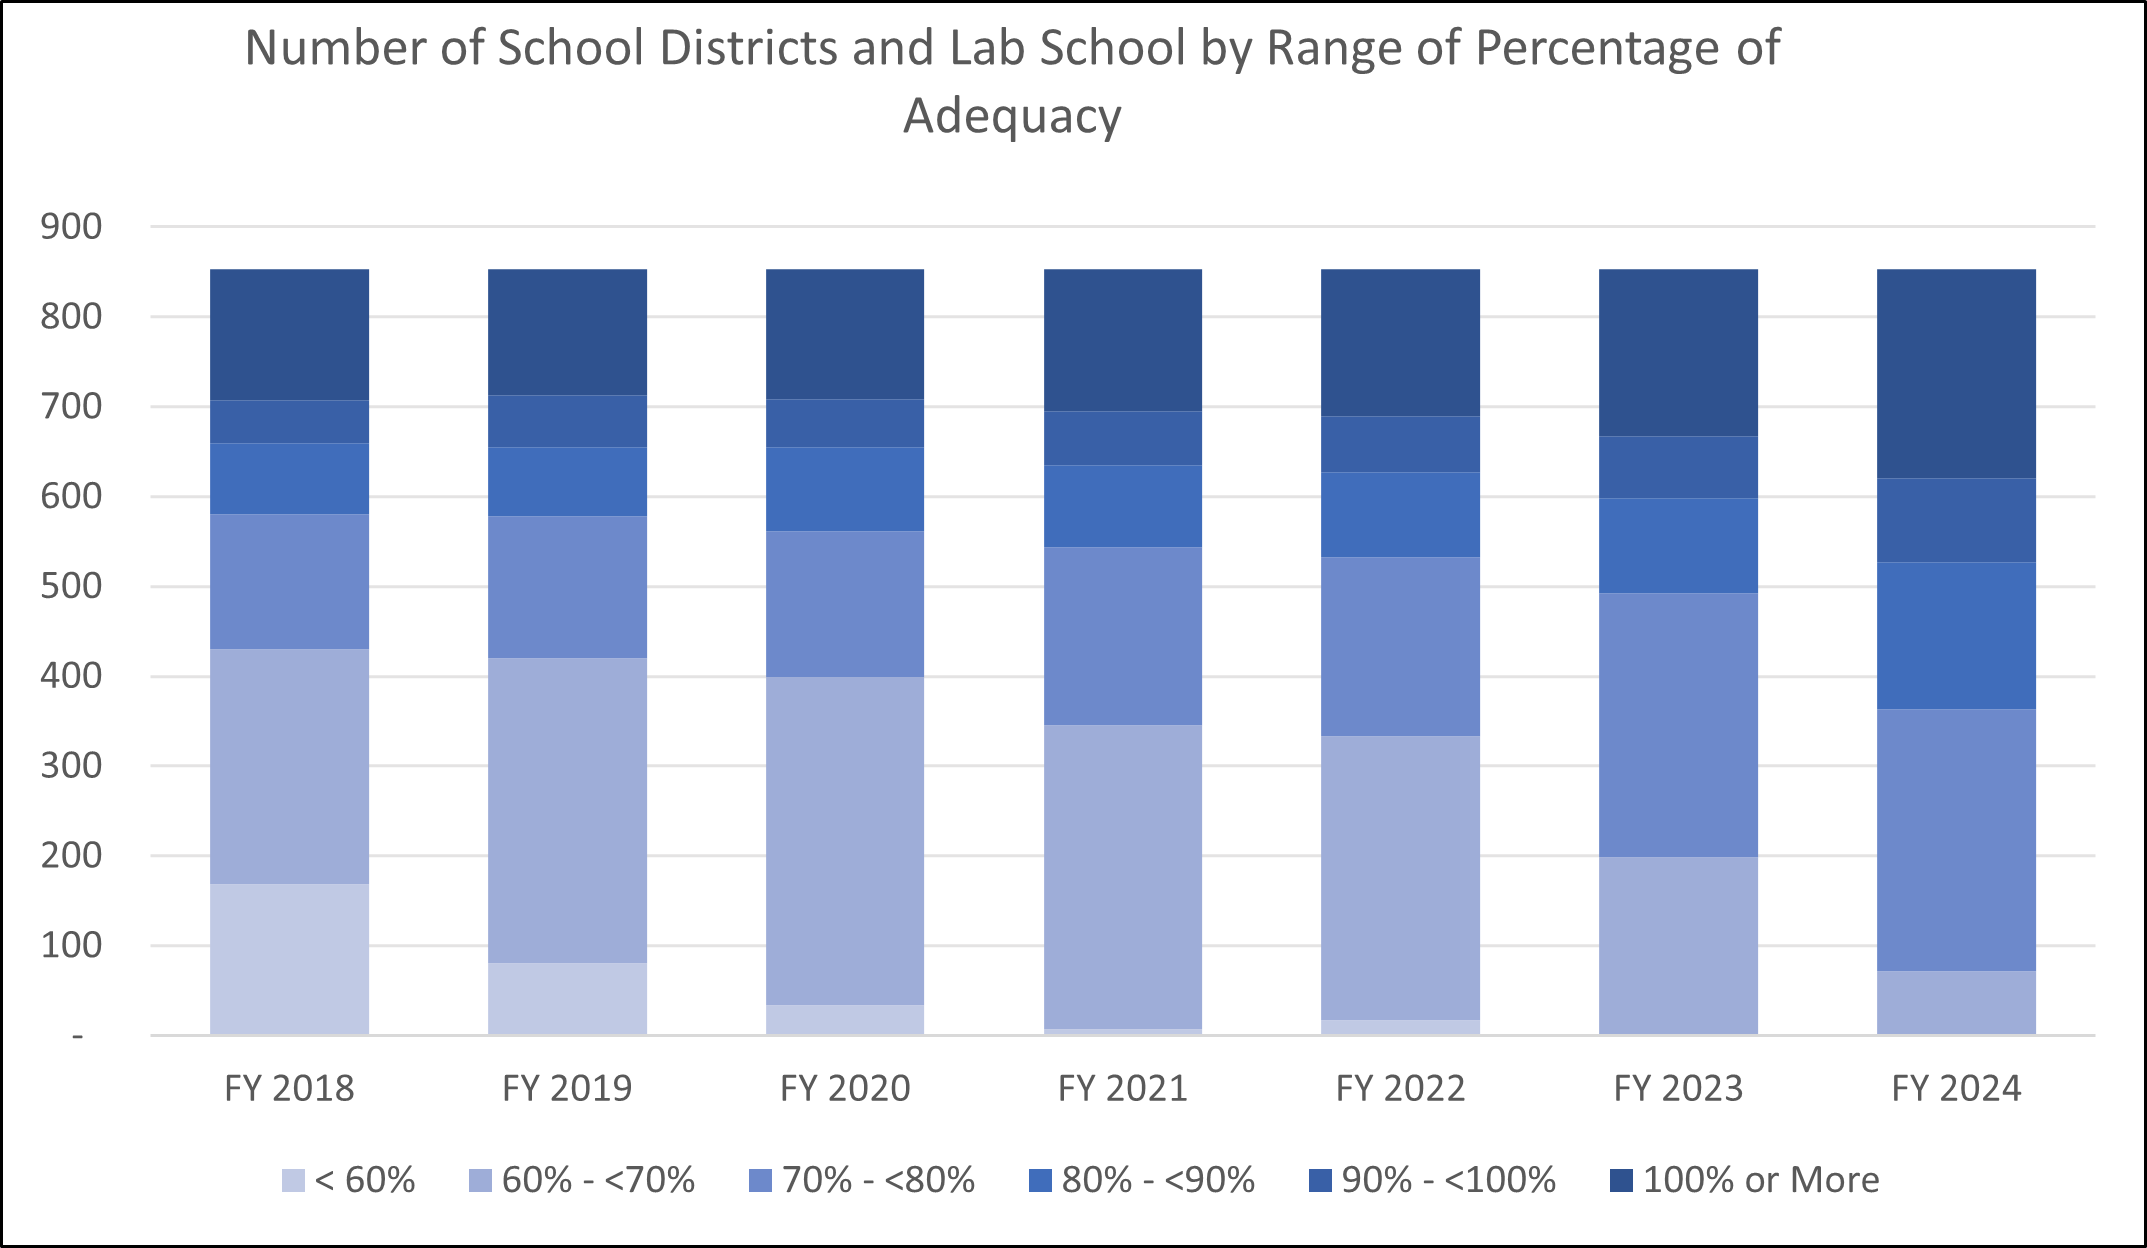 Number of School Districts and Lab School by Range of Percentage of Adequacy